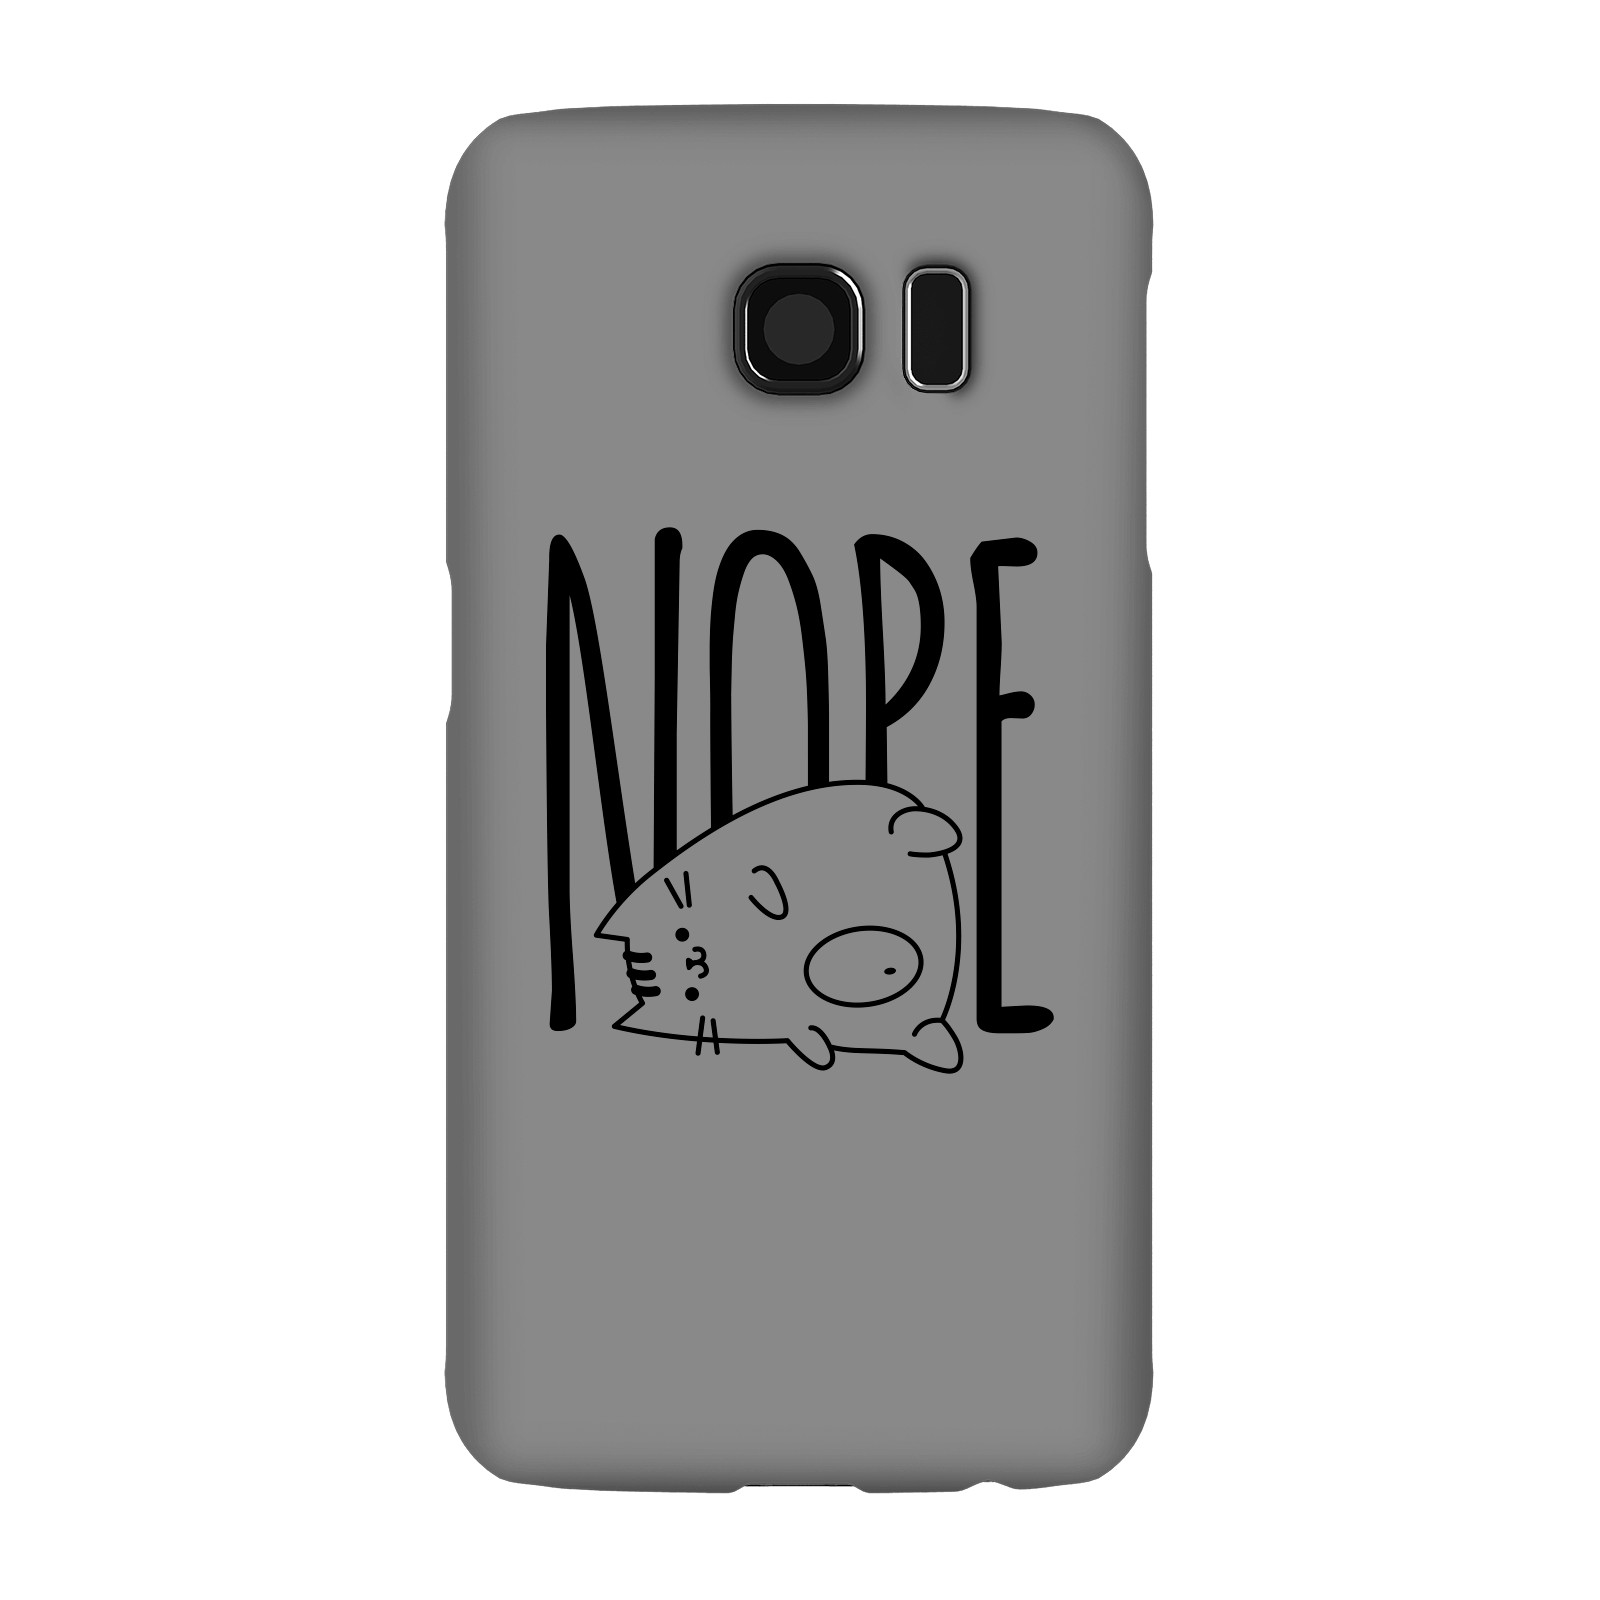 Nope Phone Case for iPhone and Android - Samsung S6 - Snap Case - Matte